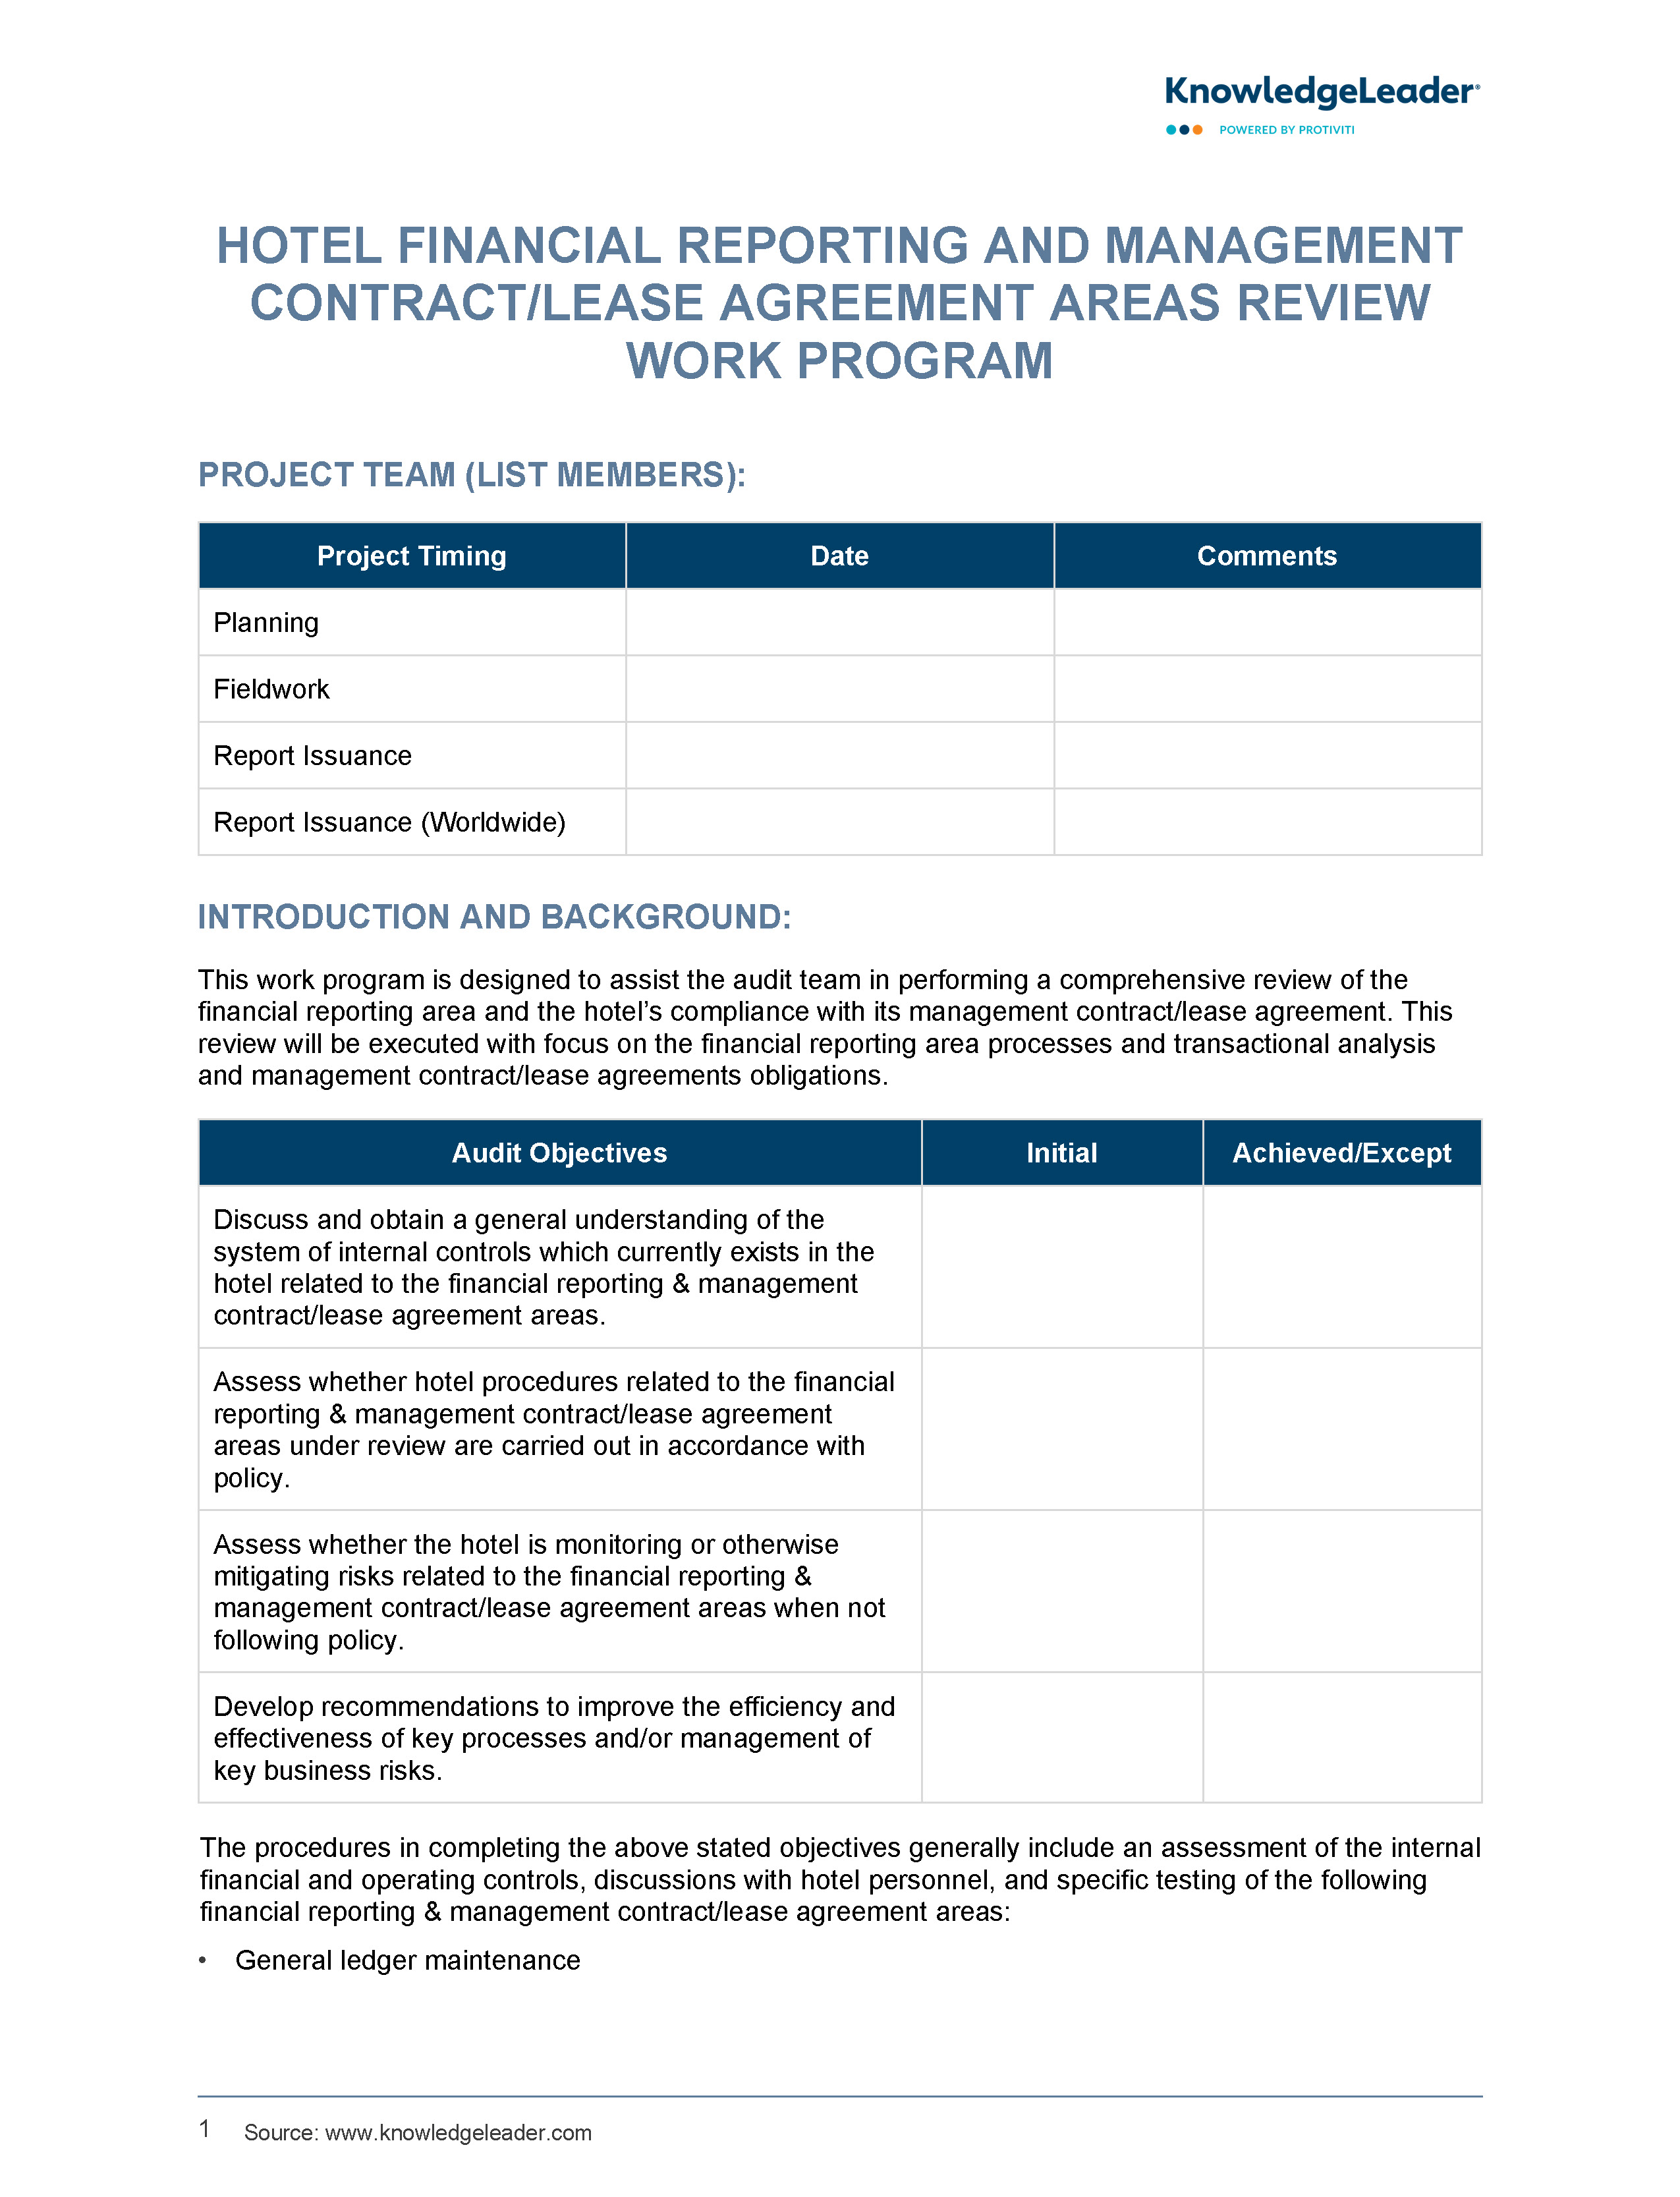 screenshot of the first page of Hotel Financial Reporting and Management Contract/Lease Agreement Areas Review Audit Work Program